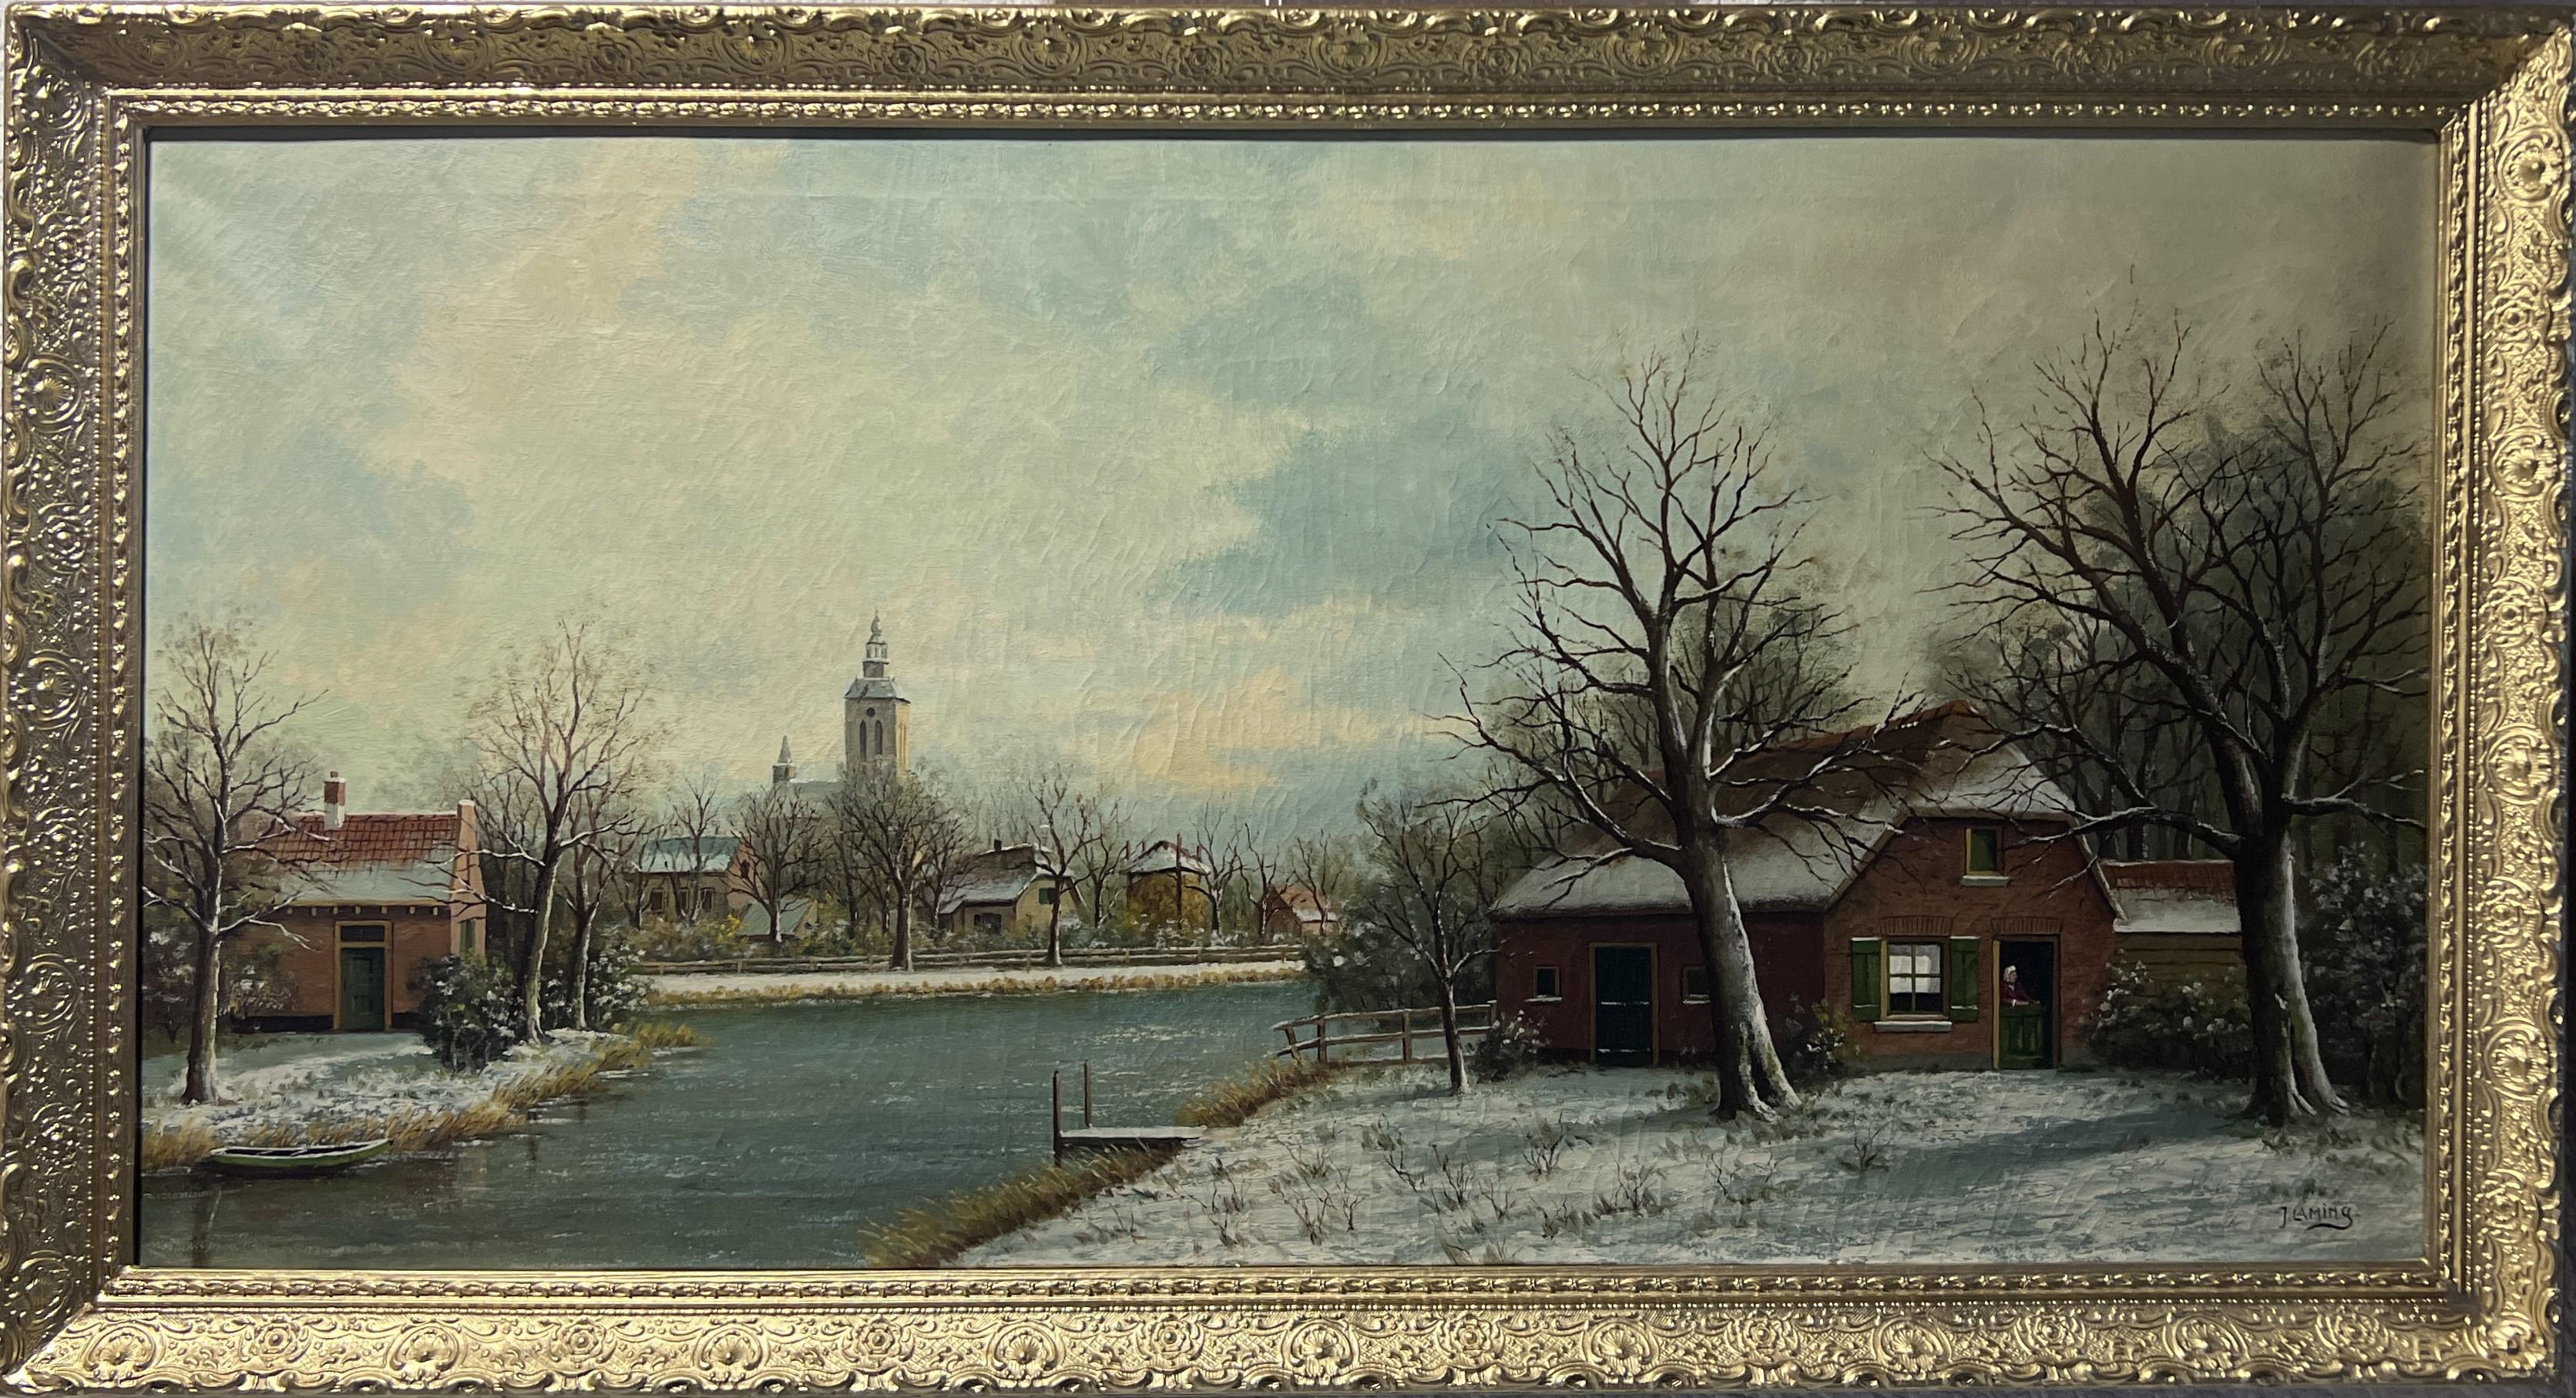 Up for sale is an original Large vintage Dutch-style oil painting on canvas depicting a rural landscape with a river view.

Signed in the lower-left corner  J.Lamina. There are some pencil notes on the backside.

Condition: Good condition, some